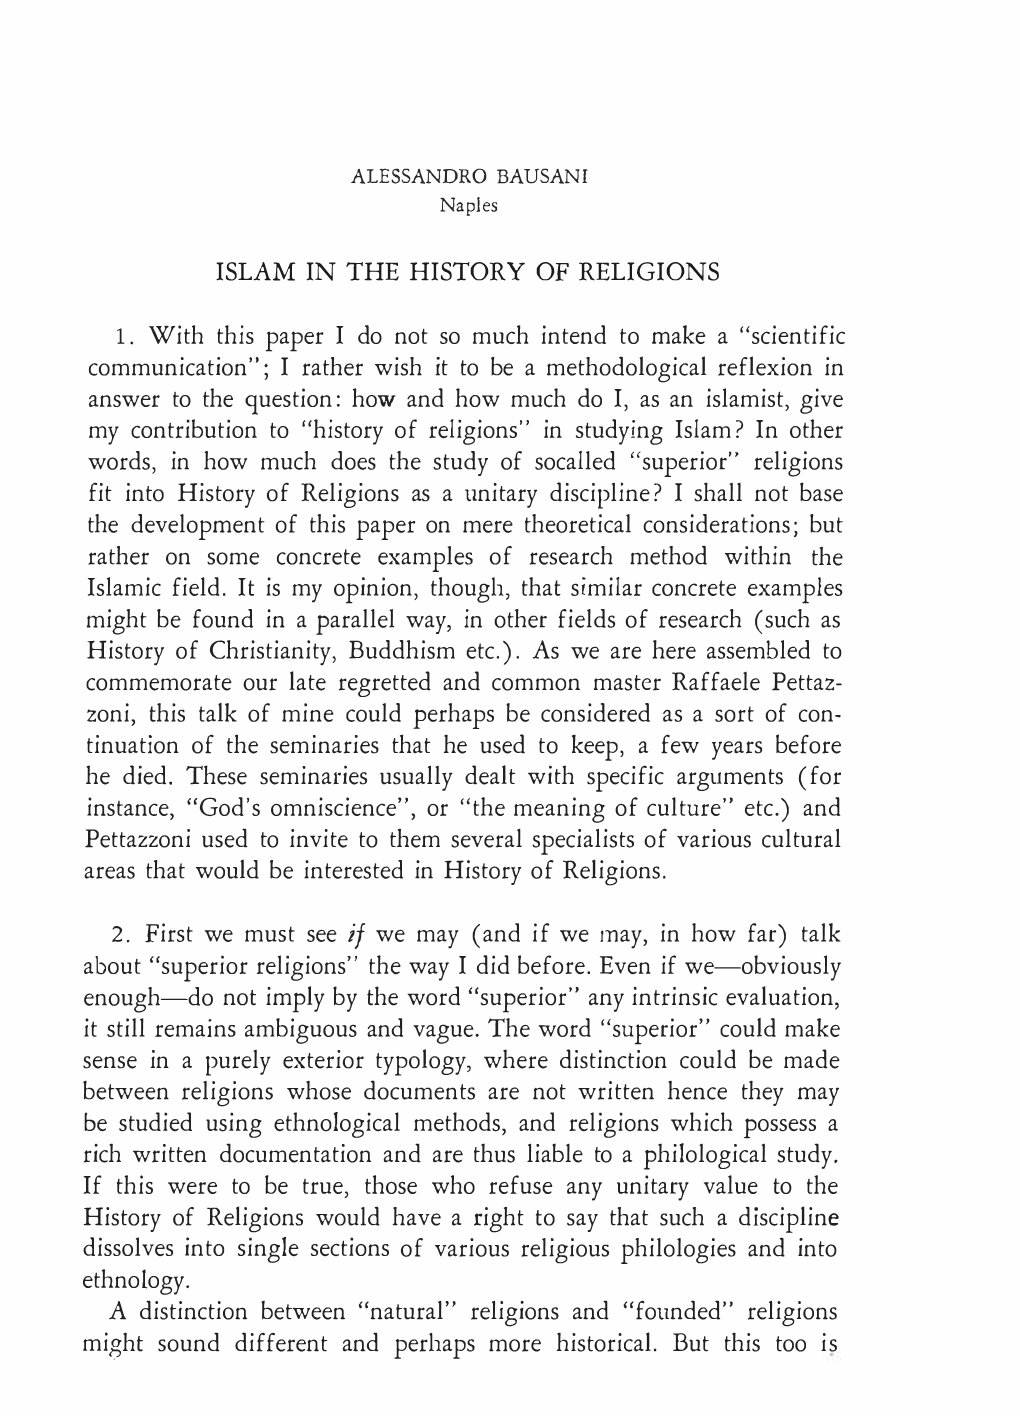 ALESSANDRO BAUSANI Naples ISLAM in the HISTORY OF